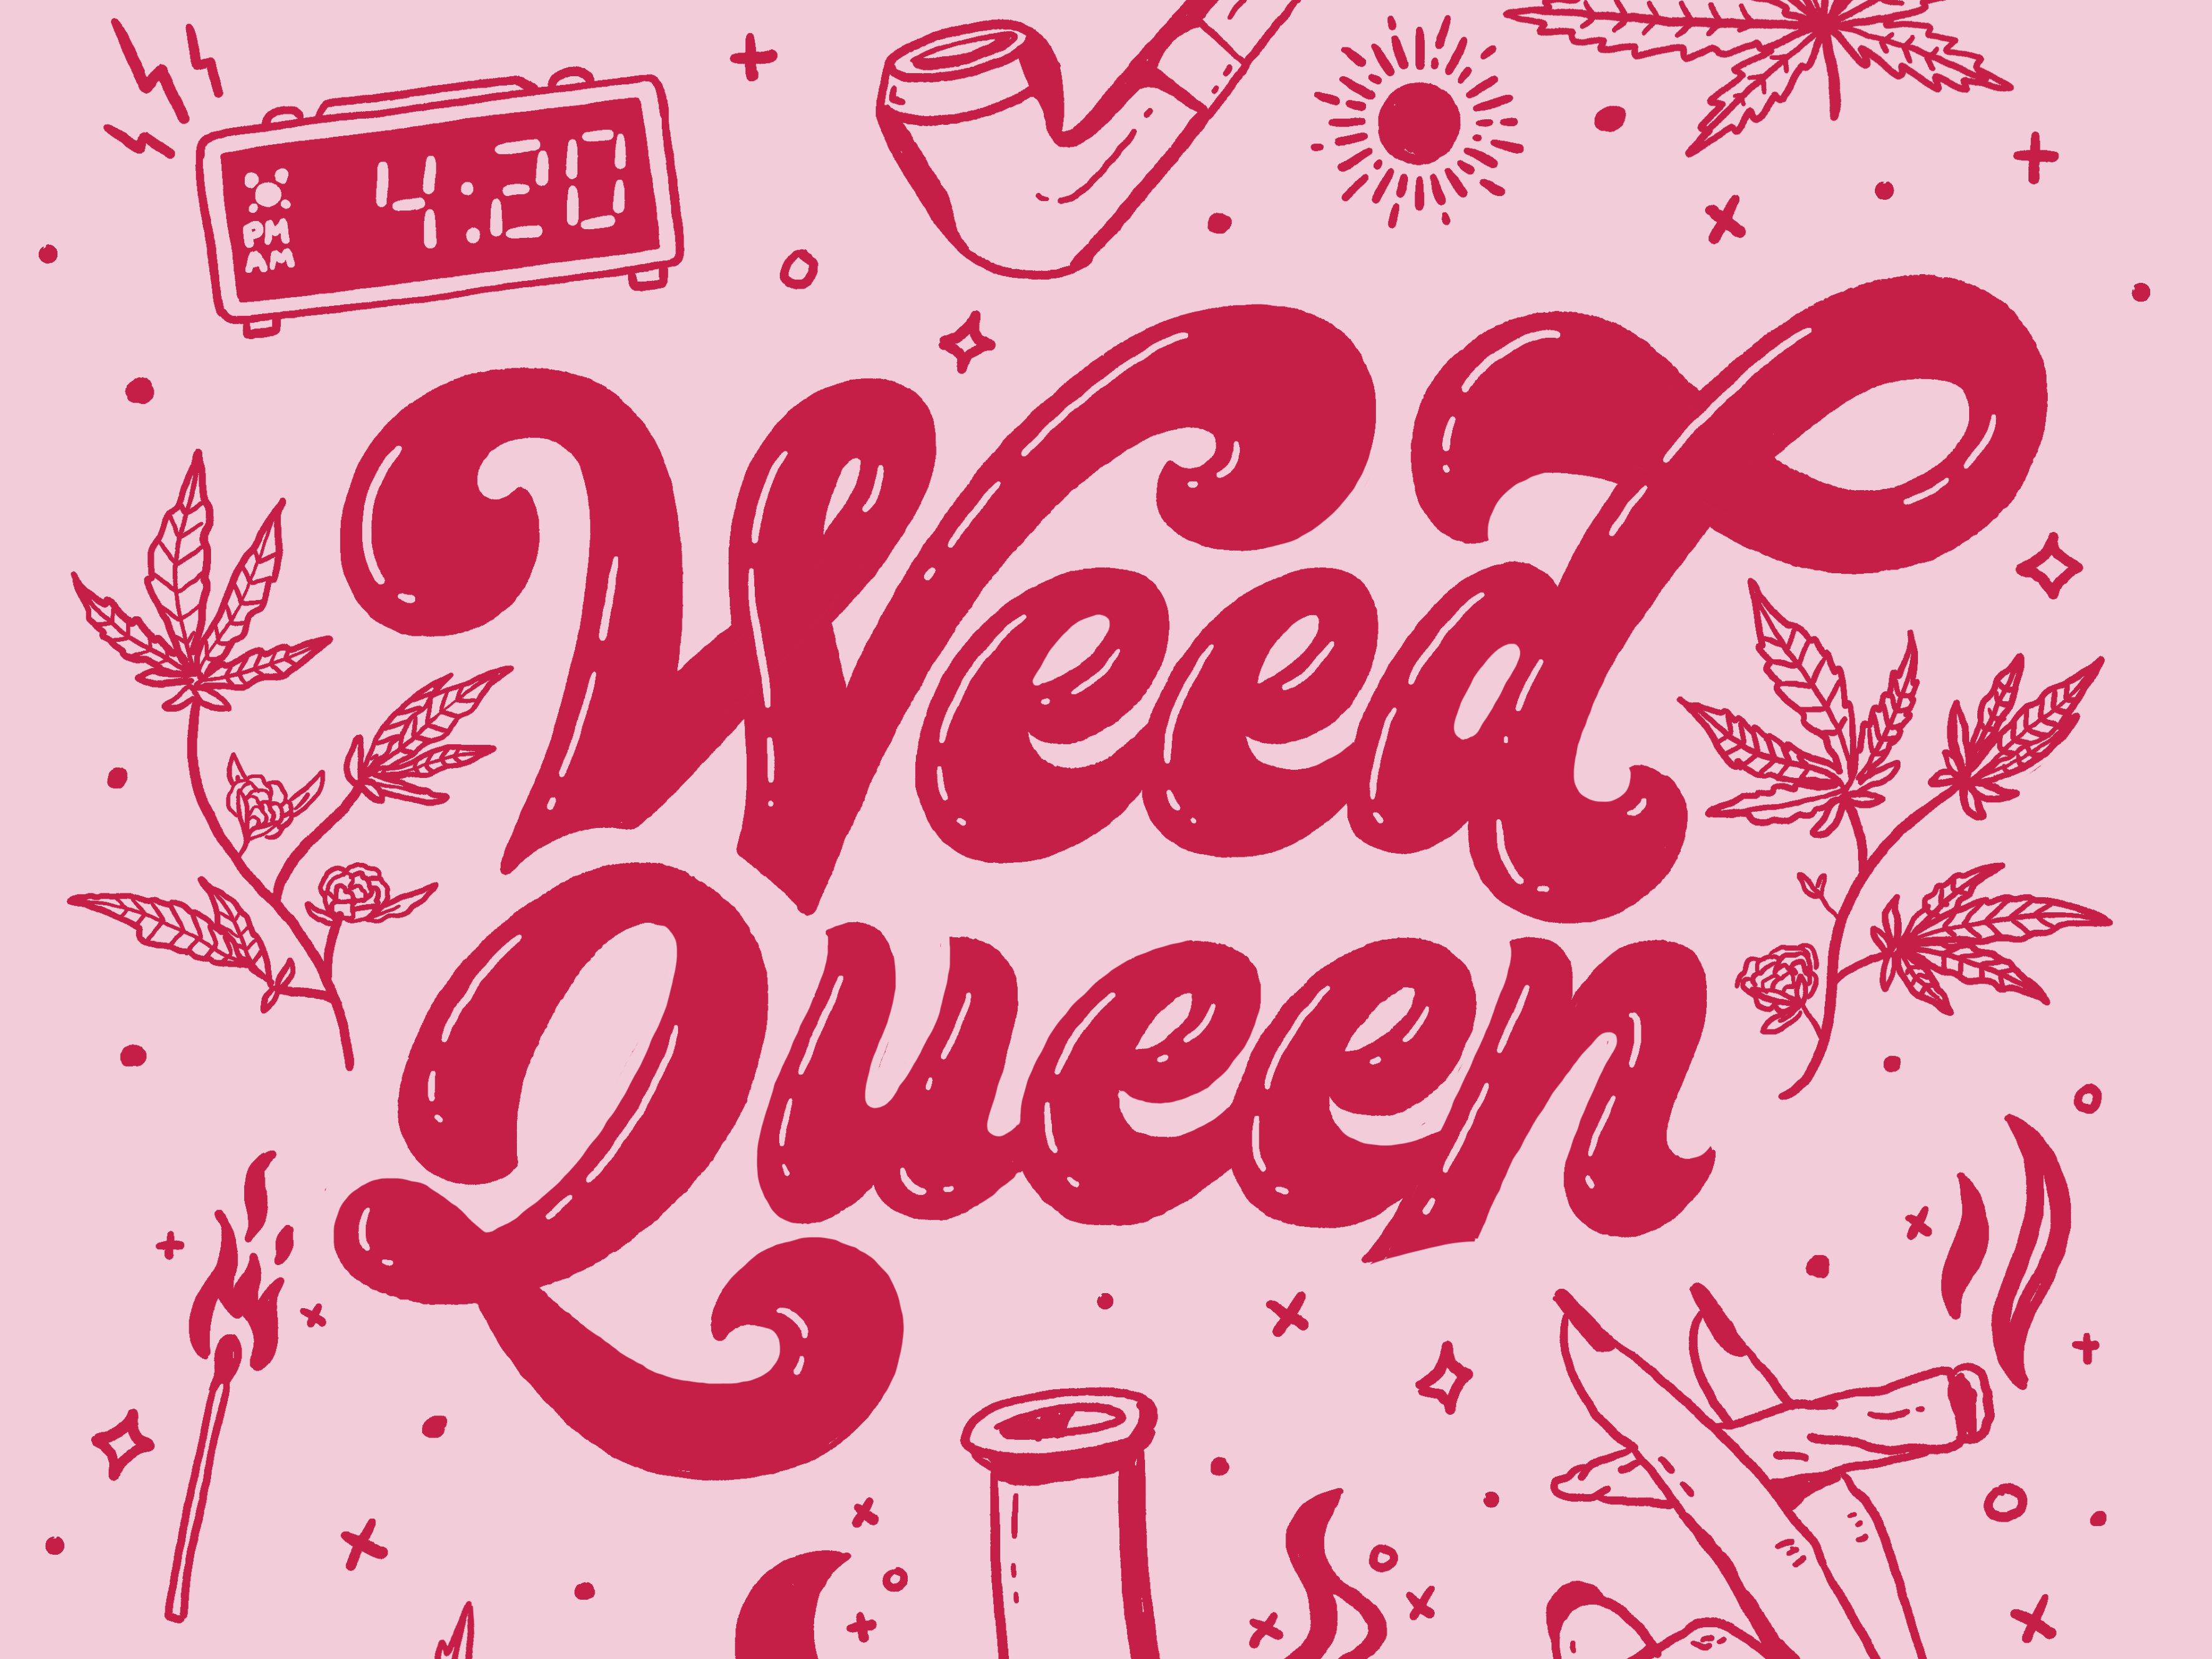 Pink Weed Aesthetic Wallpapers